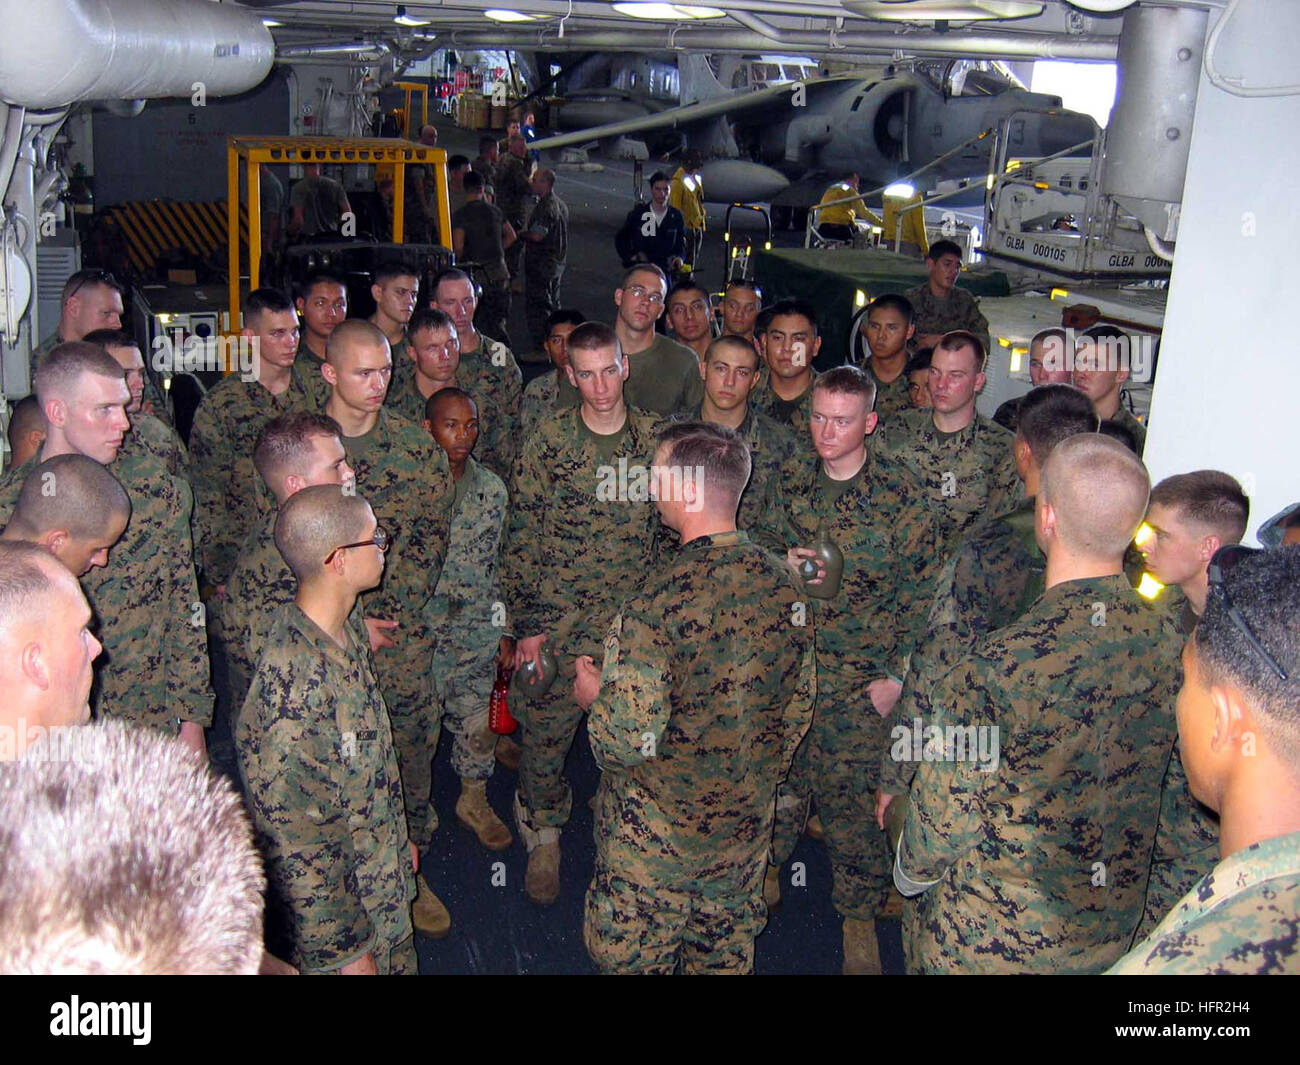 060219-N-4880C-003 Off the coast of Southern Leyte, Republic of the Philippines (Feb. 19, 2006) Ð Marines from the 31st Marine Expeditionary Unit (31MEU) are briefed in the shipÕs hangar bay aboard the amphibious assault ship USS Essex (LHD 2), before going ashore to assist with rescue efforts following the Feb. 17 landslide. Essex along with the dock landing ship USS Harpers Ferry (LSD 49) are on station off the Philippine coast rendering relief and assistance to the victims of the landslide.  Both are part of the Forward Deployed Amphibious Ready Group, the NavyÕs only forward deployed amphi Stock Photo